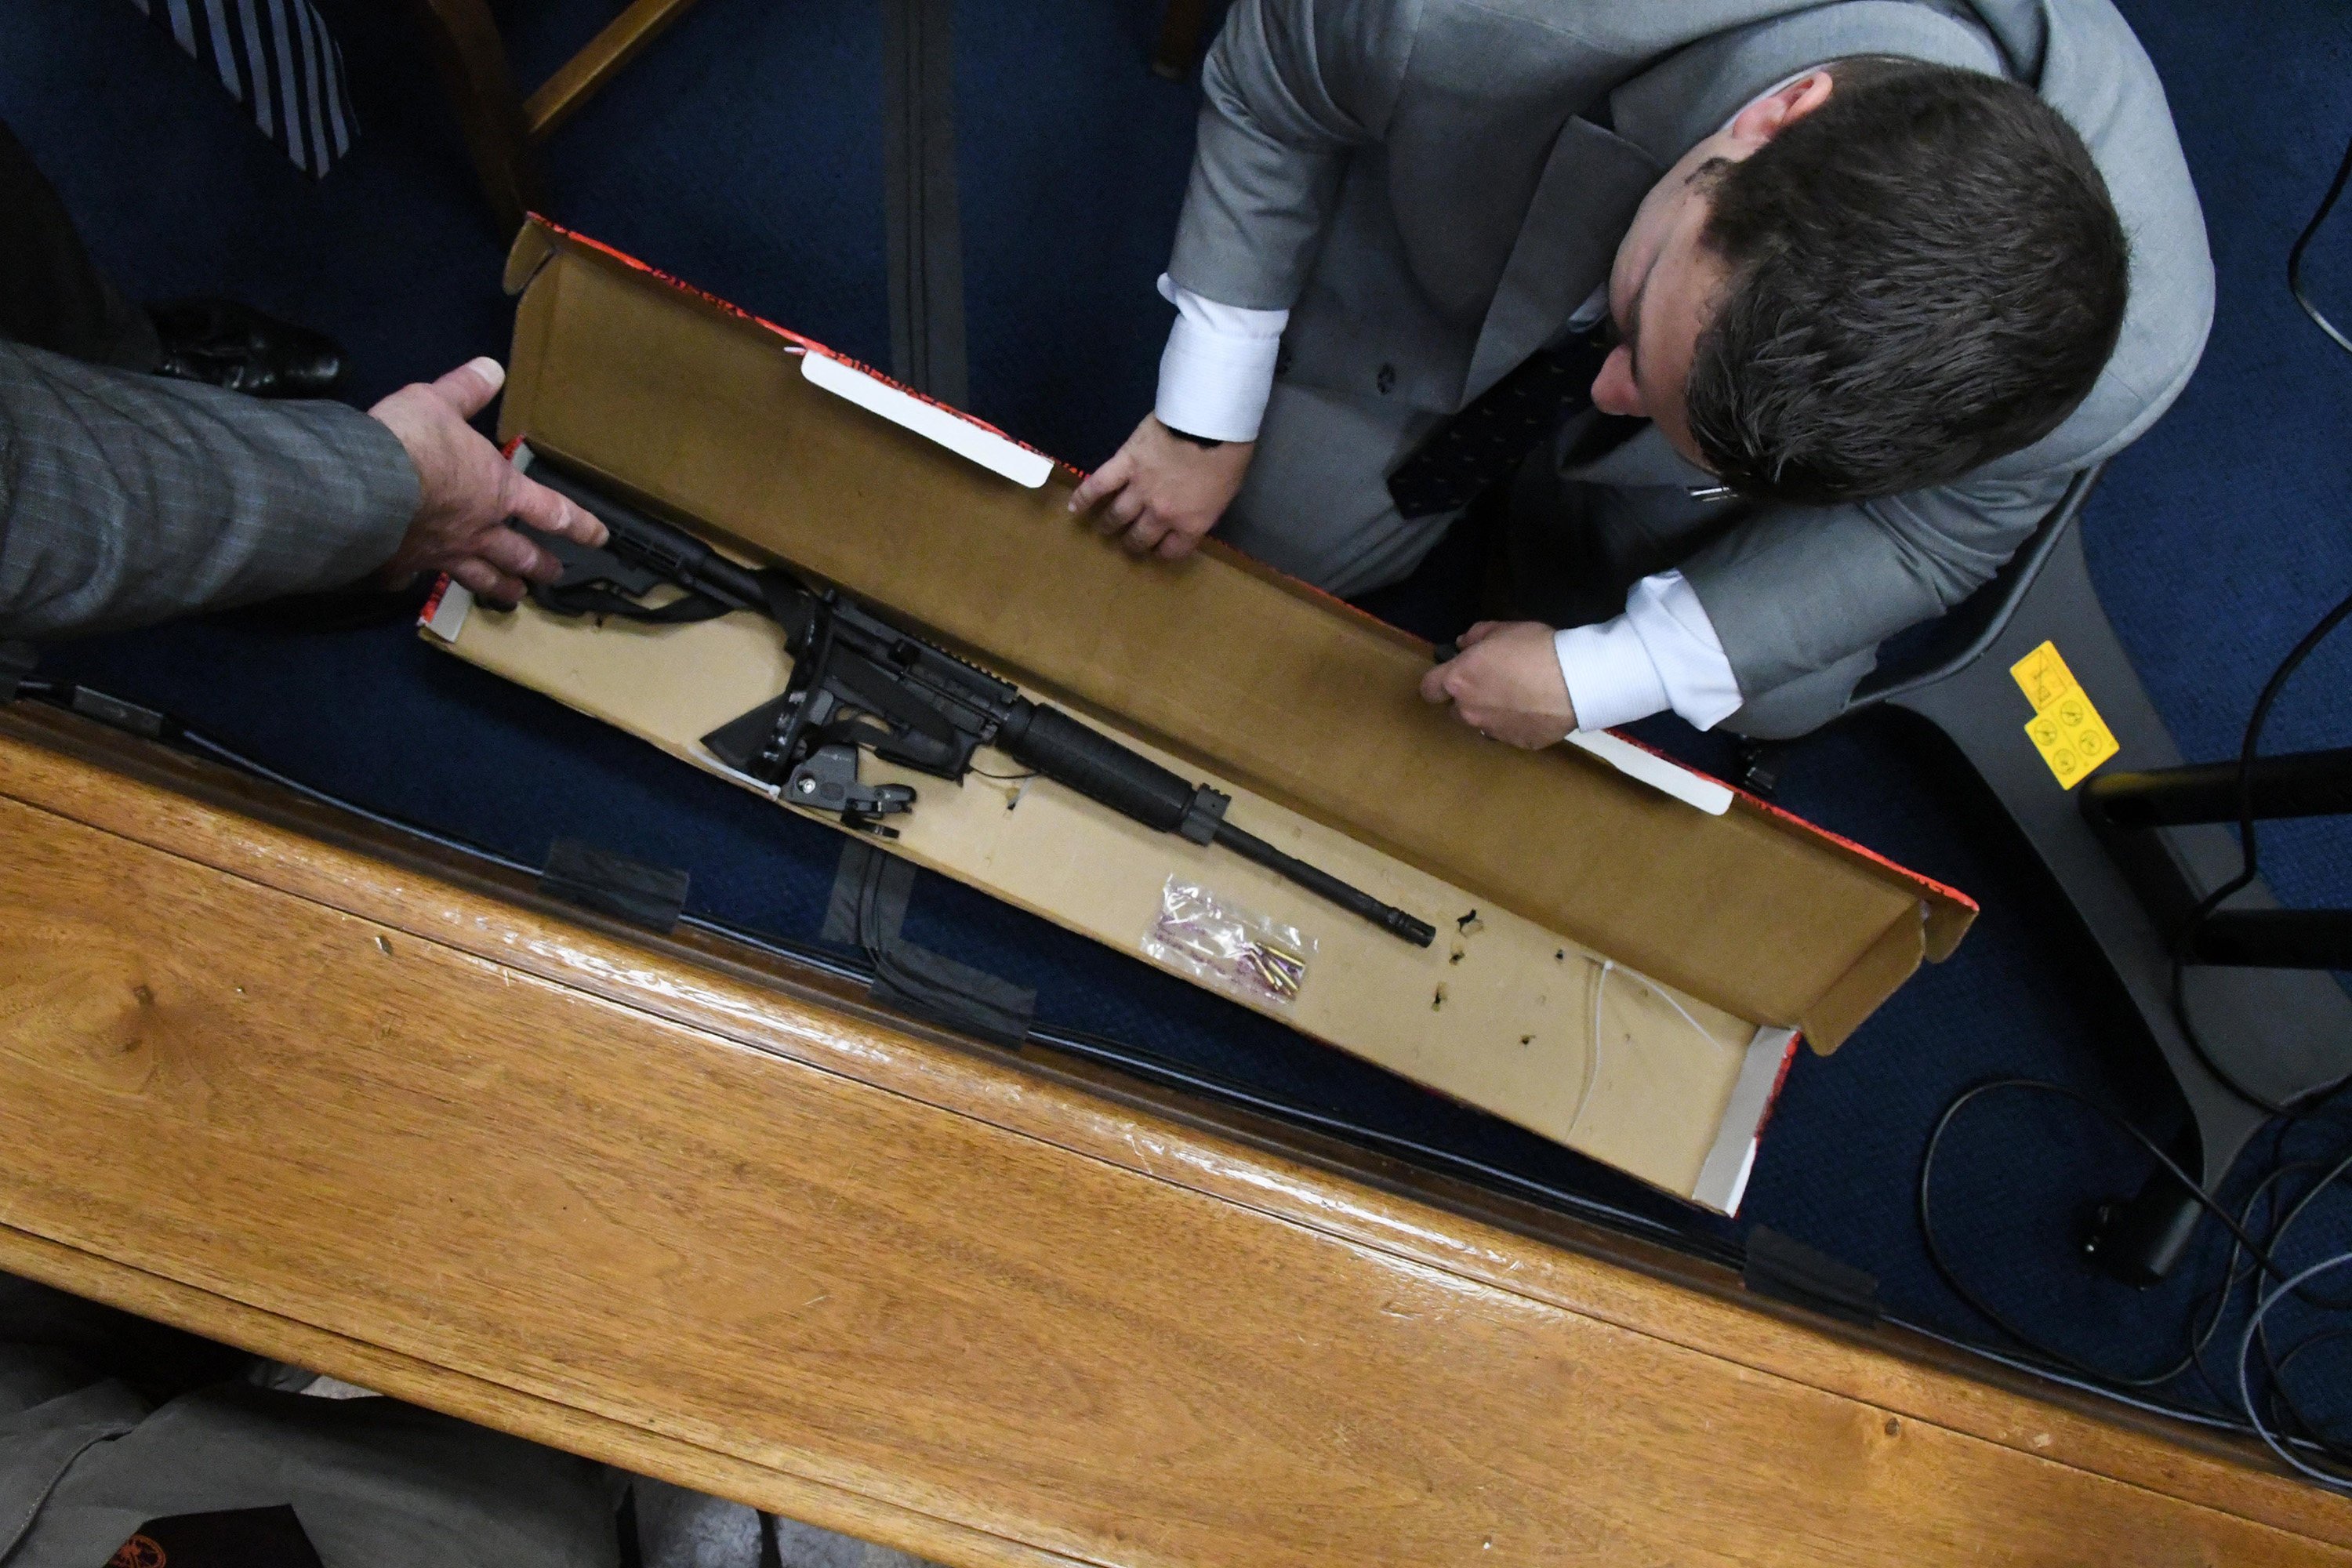 Defence attorney Mark Richards asks Kenosha Police detective Ben Antaramian to show him Kyle Rittenhouse’s rifle and bullets before court started on November 9. Photo: TNS